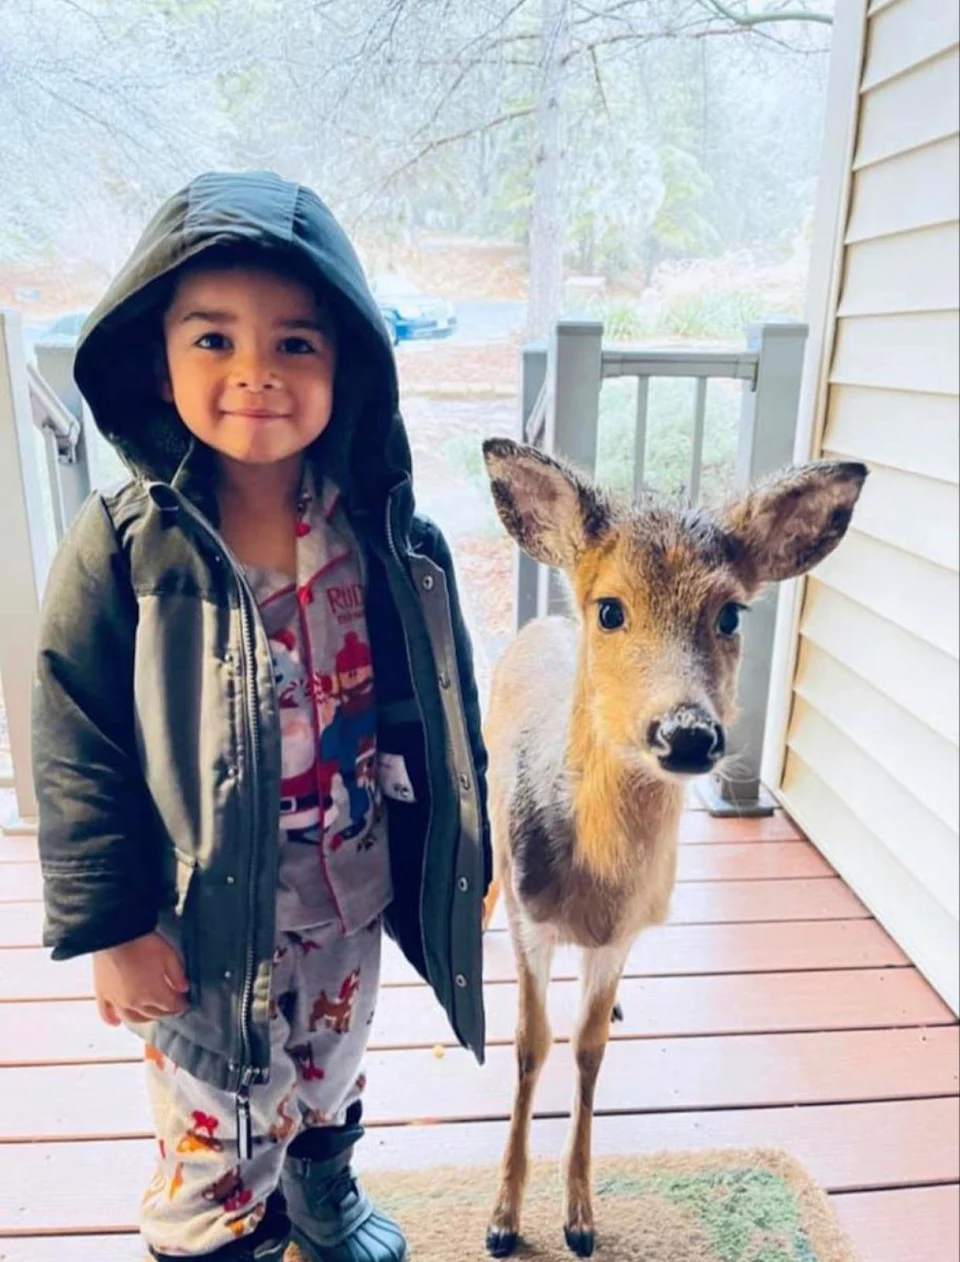 4yo in Virginia went outside to play then came back with a new friend